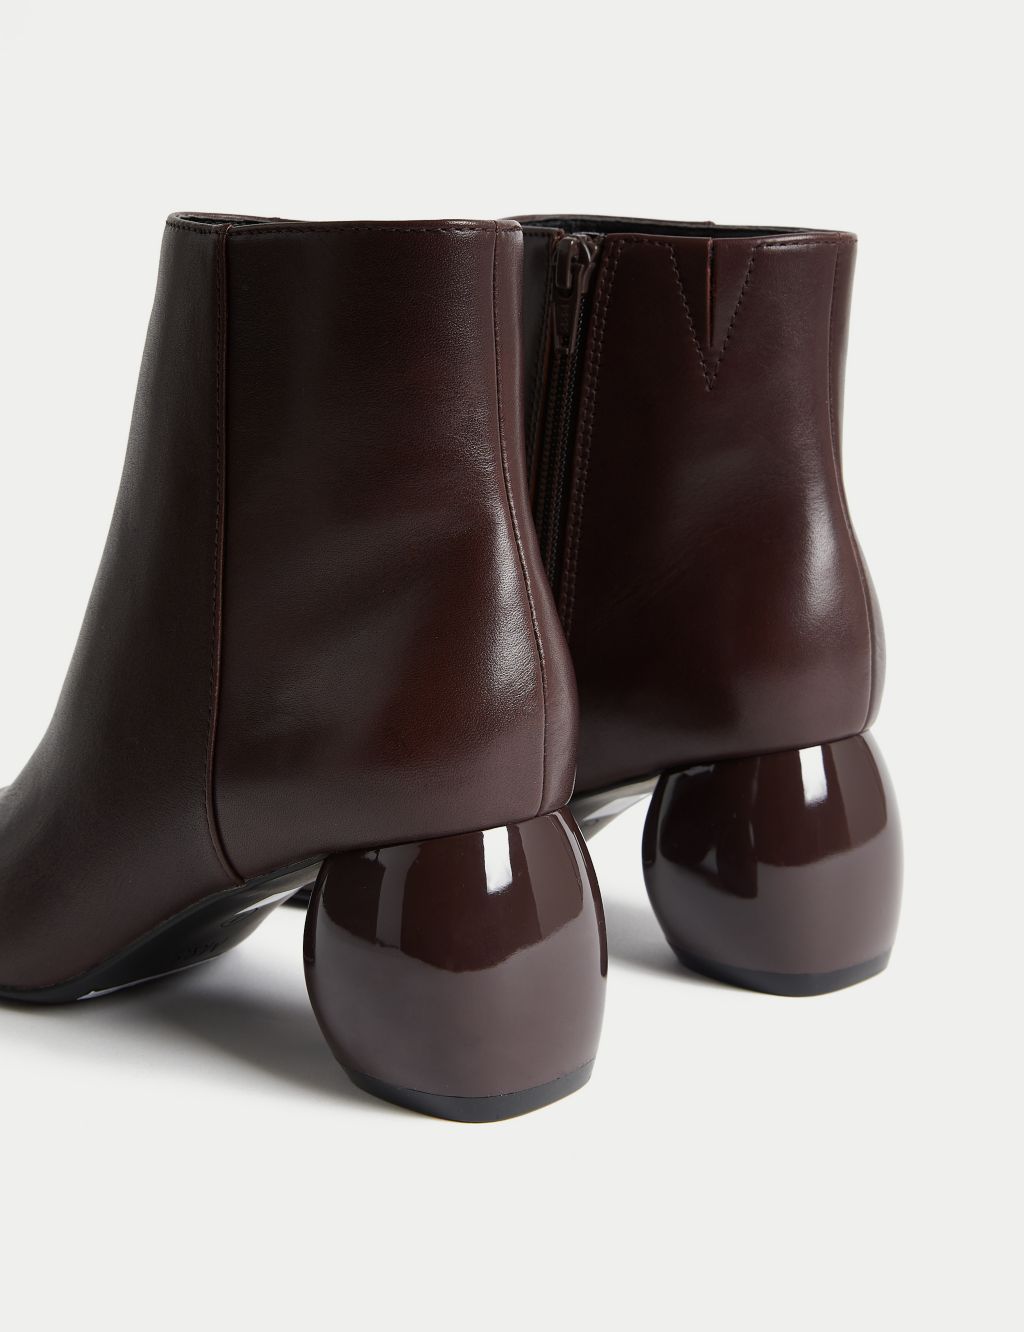 Leather Statement Block Heel Ankle Boots image 3